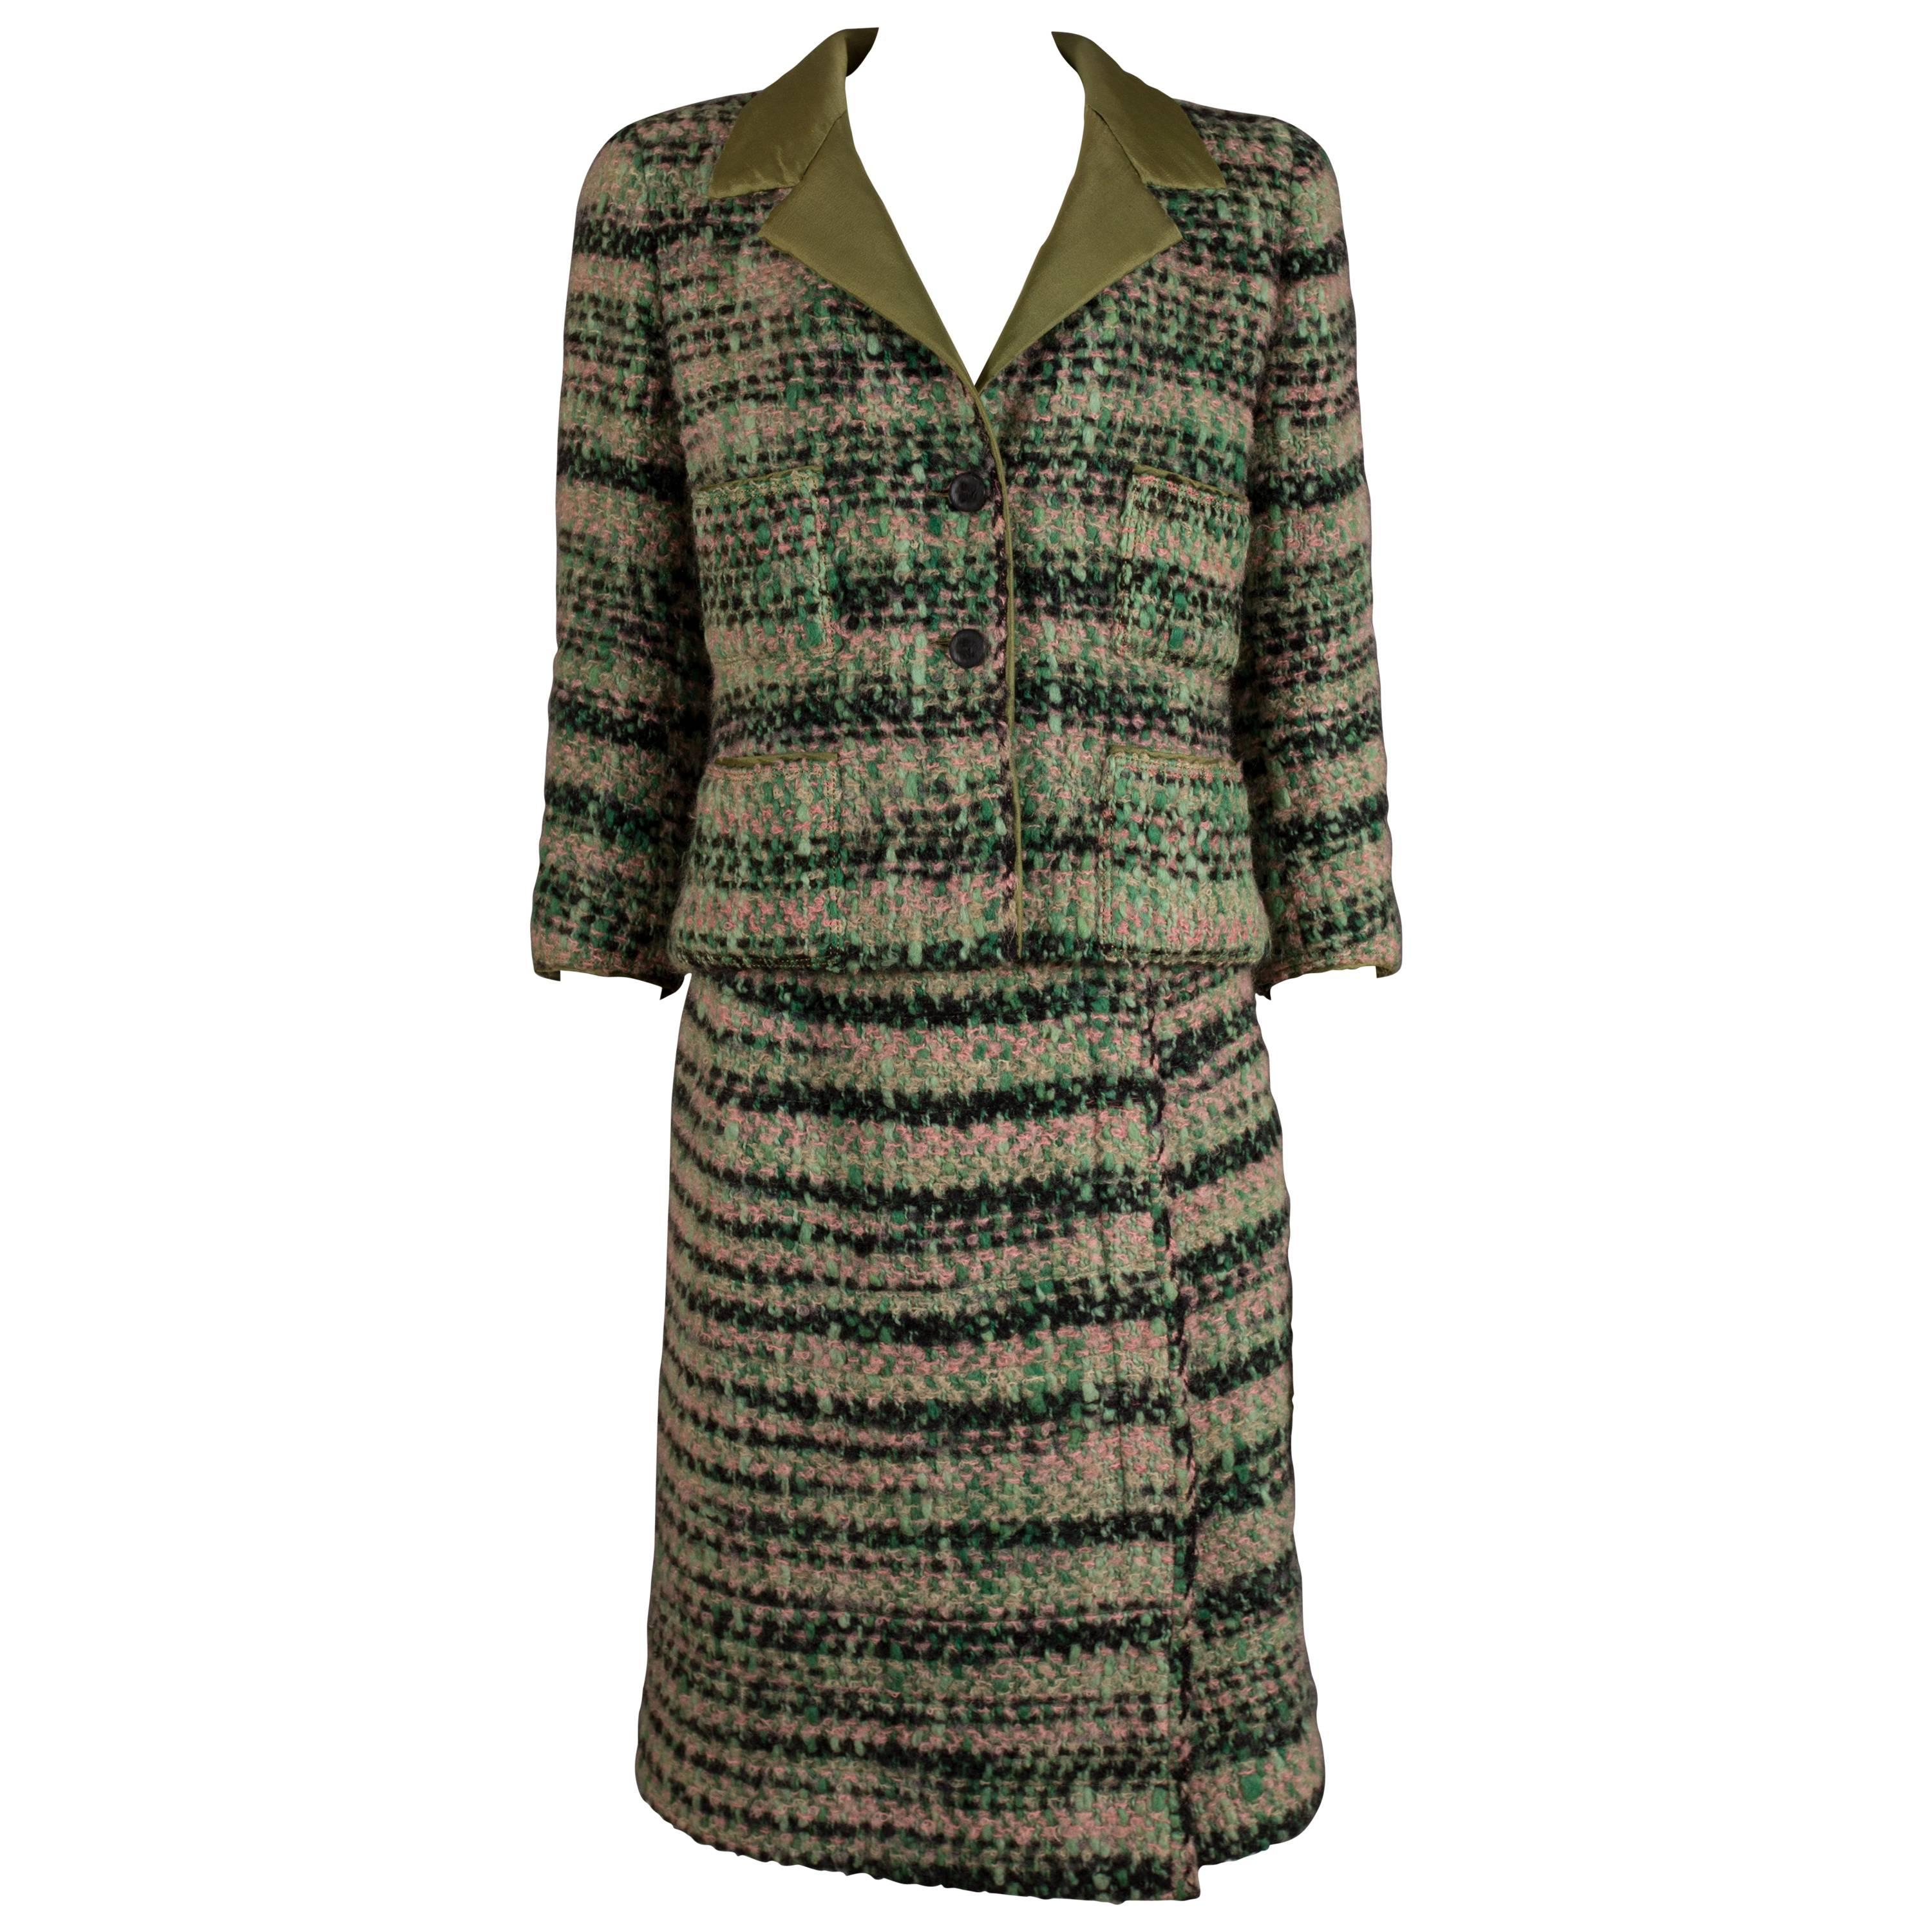 Chanel Haute Couture tweed skirt suit, Circa 1960s